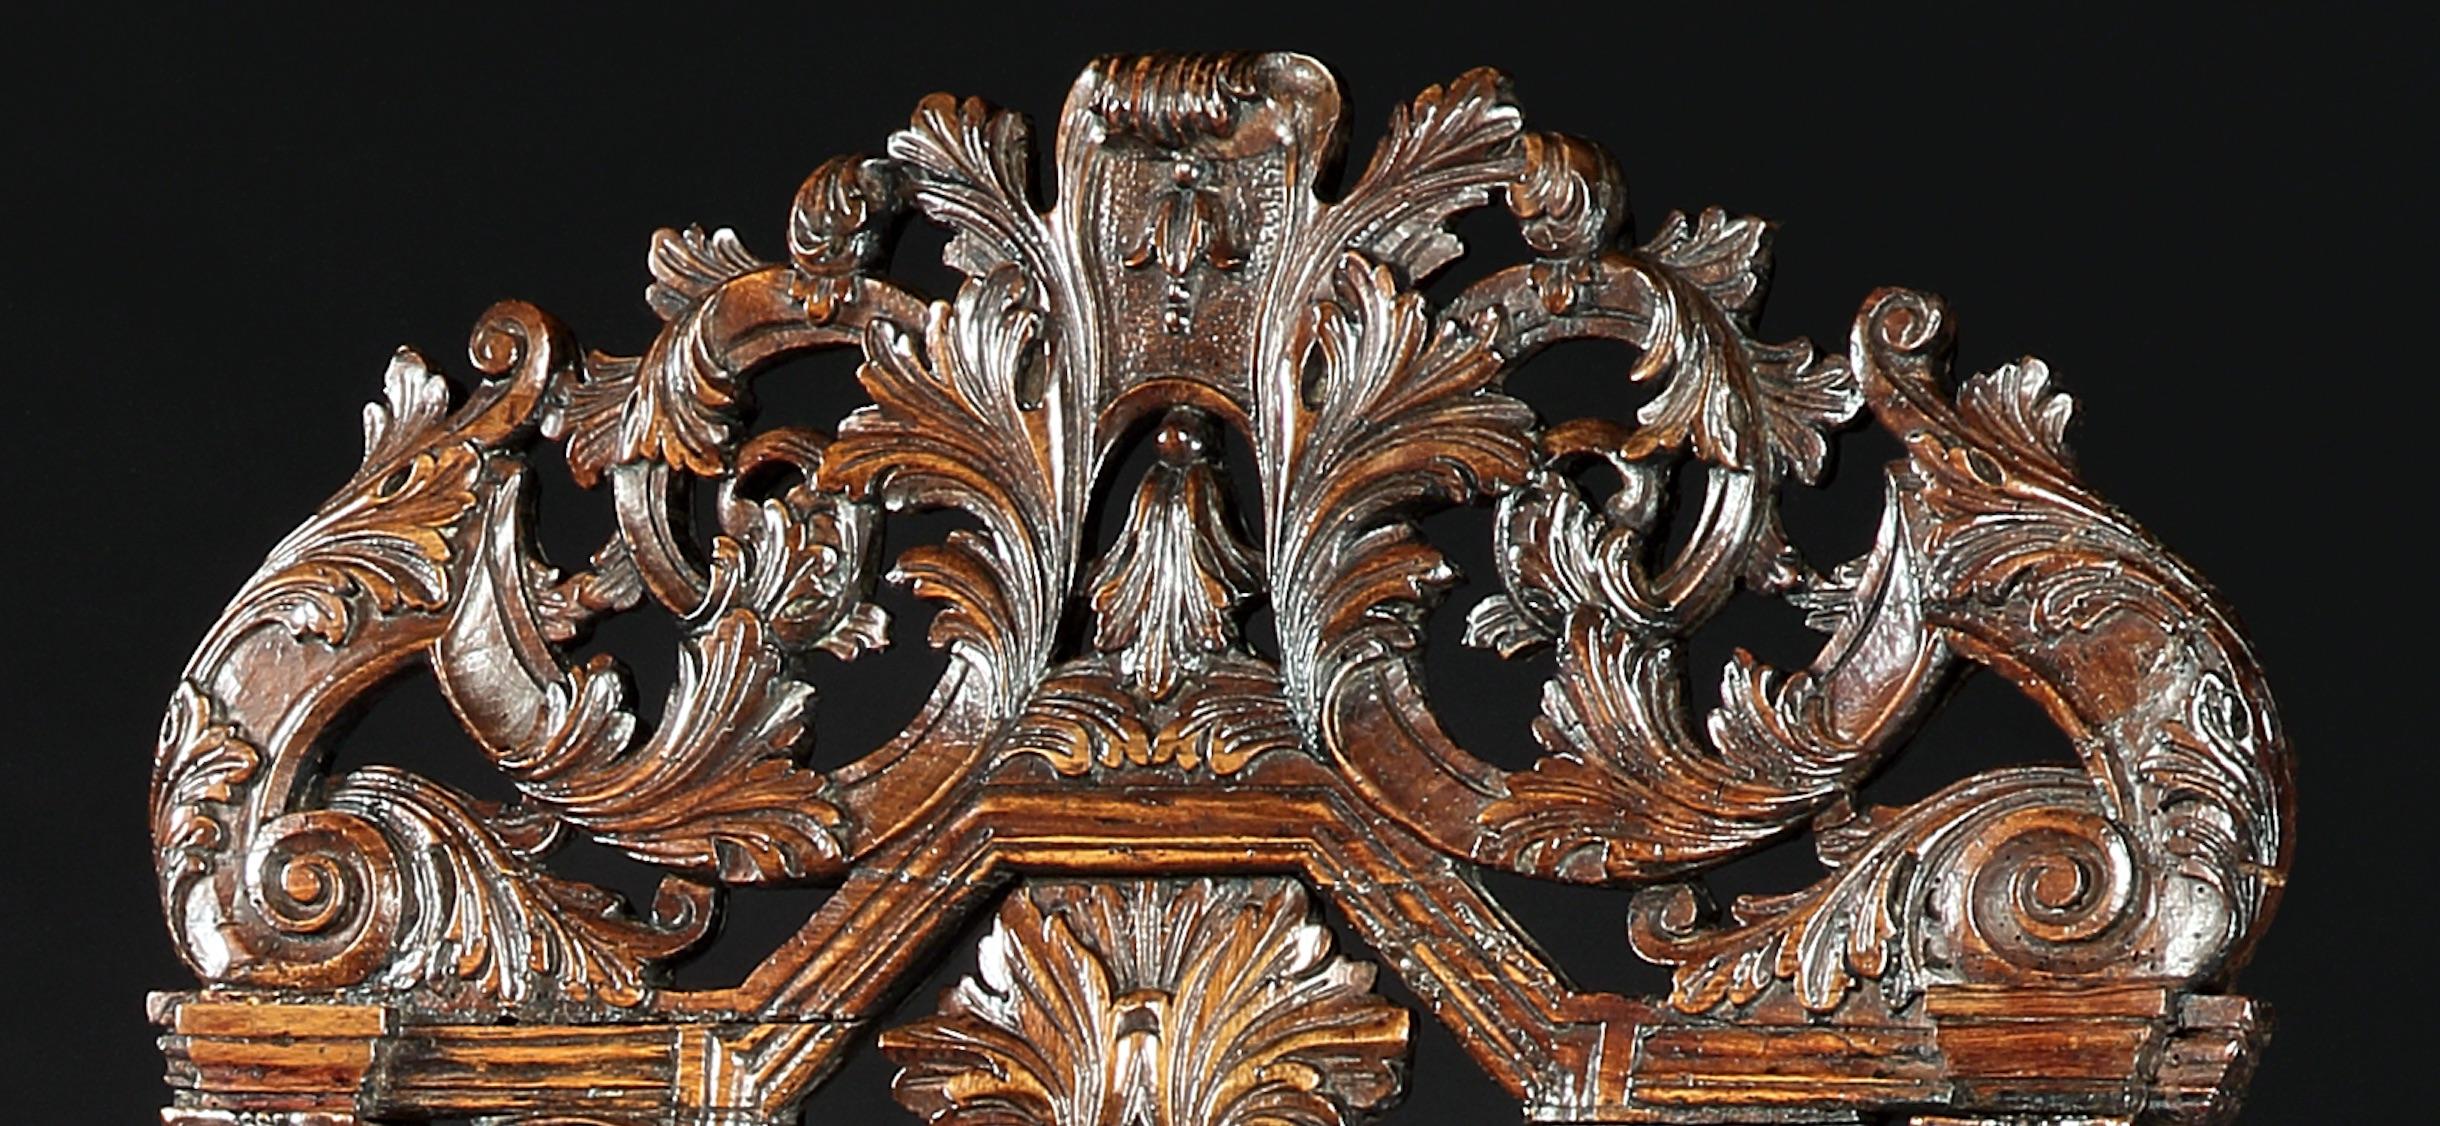 17th century french baroque furniture